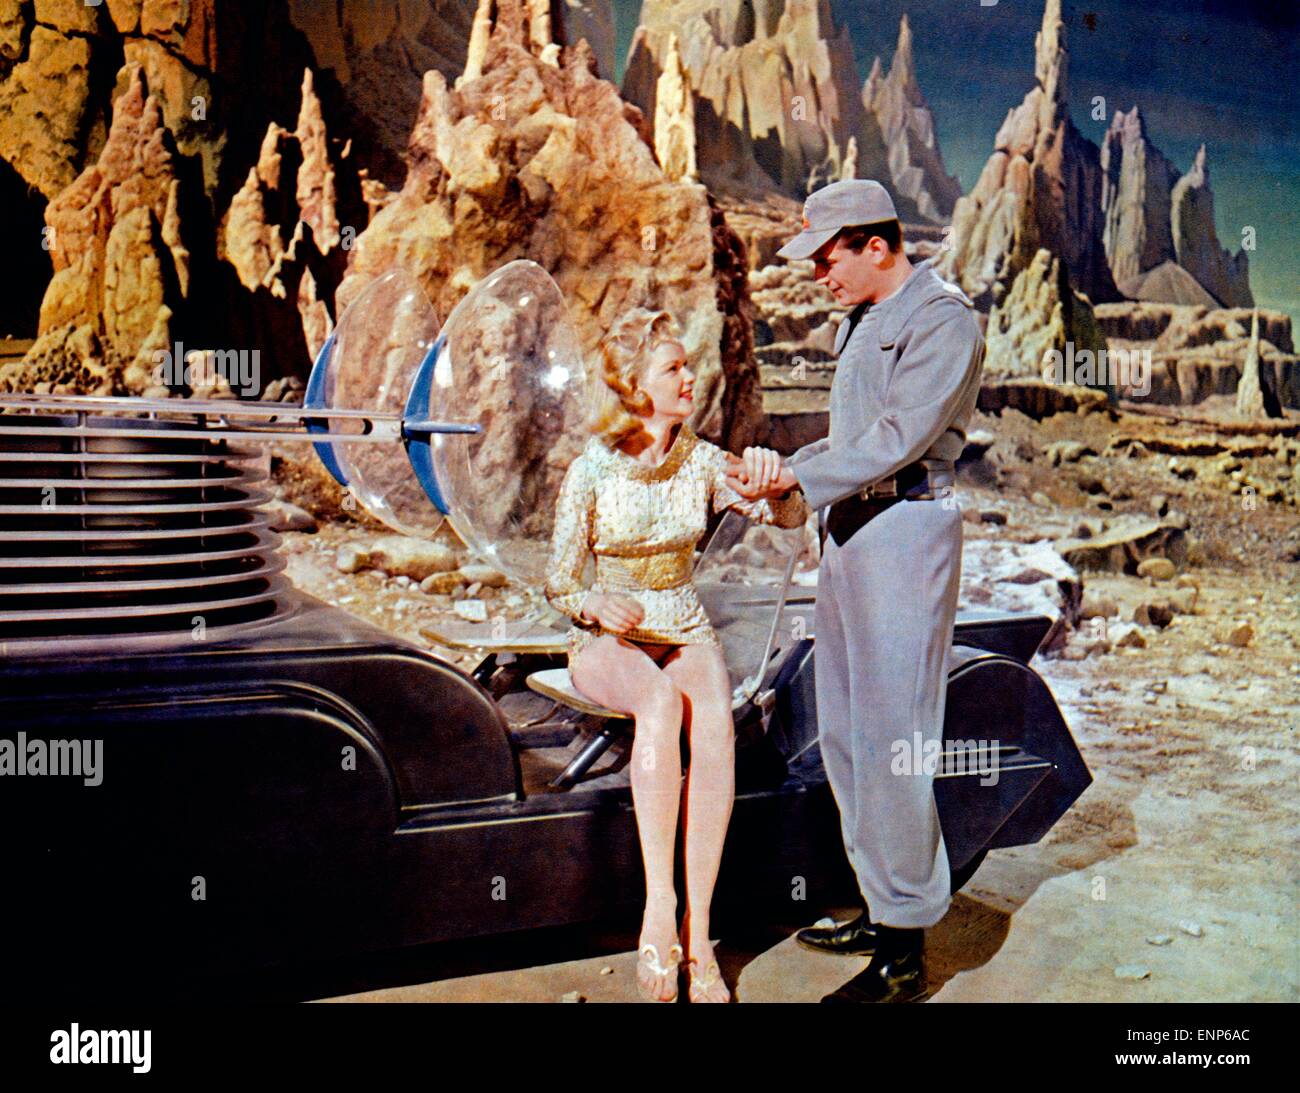 Forbidden Planet (1956) directed by Fred M. Wilcox • Reviews, film + cast •  Letterboxd